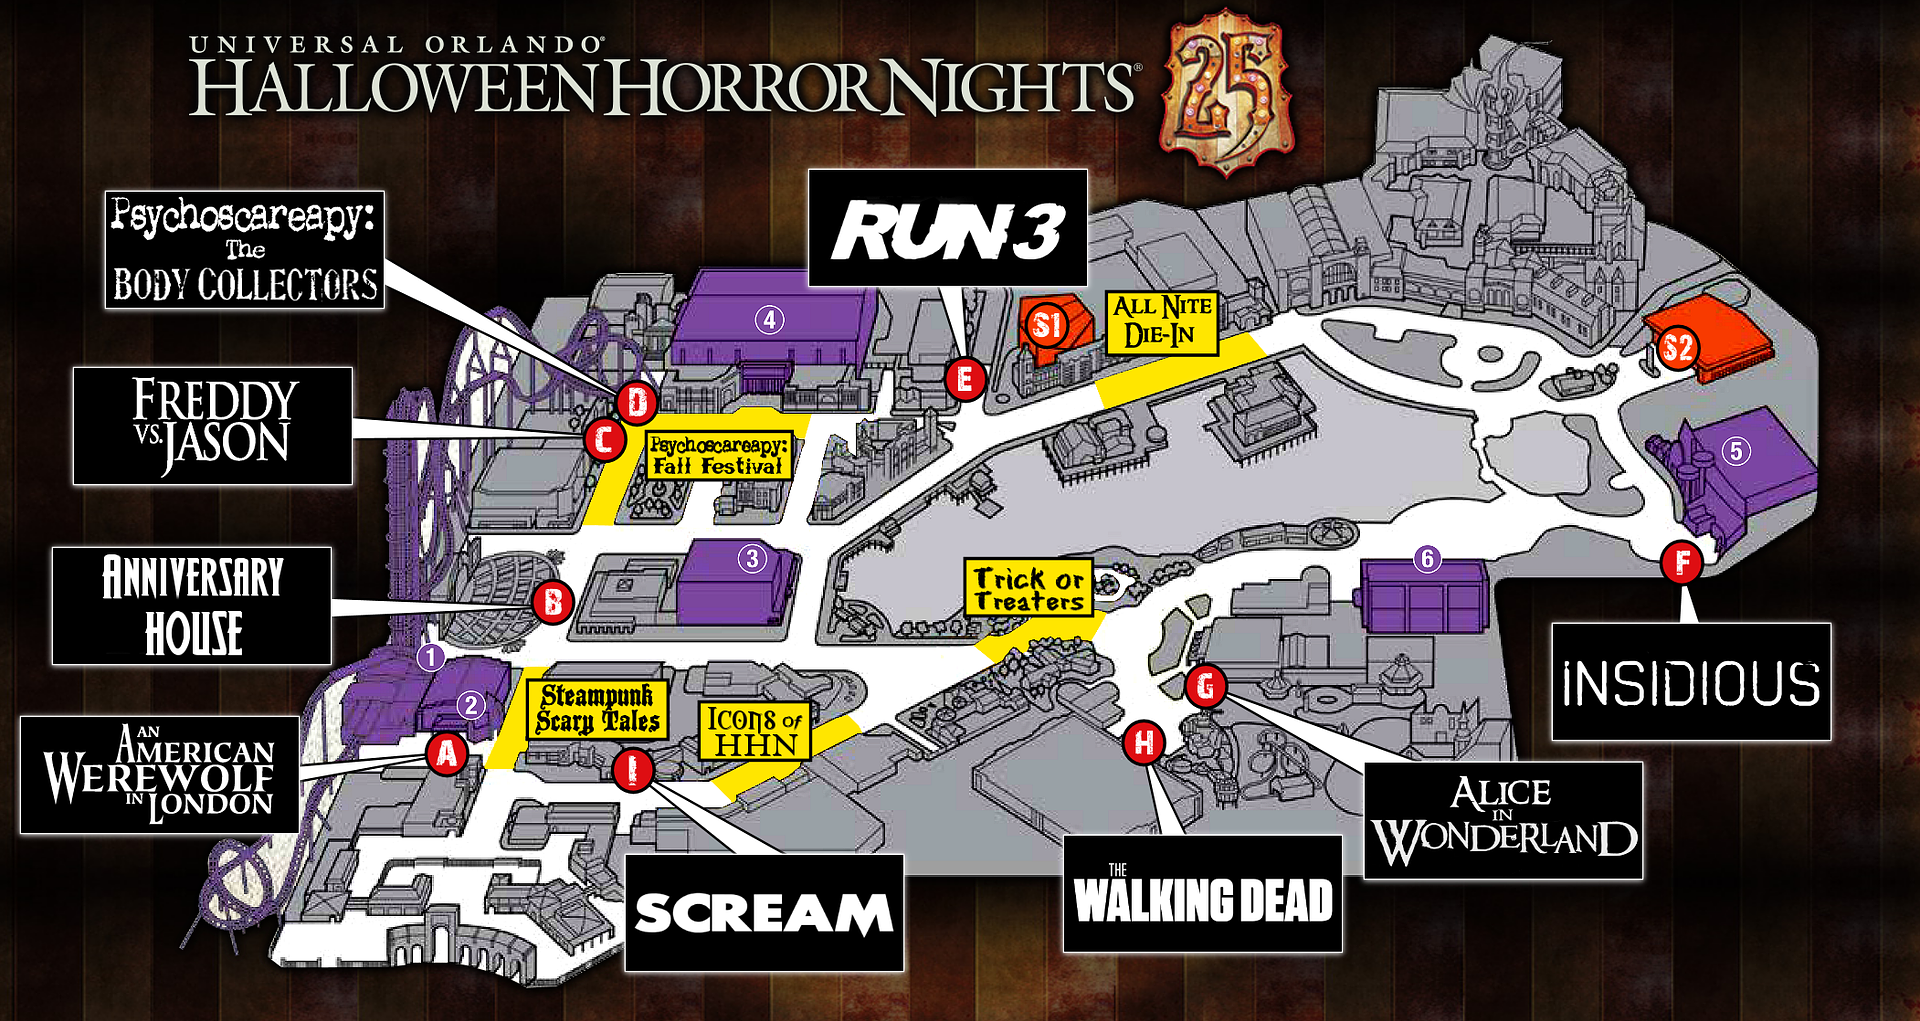 HHN%2025%20Speculation%20Map_3.png